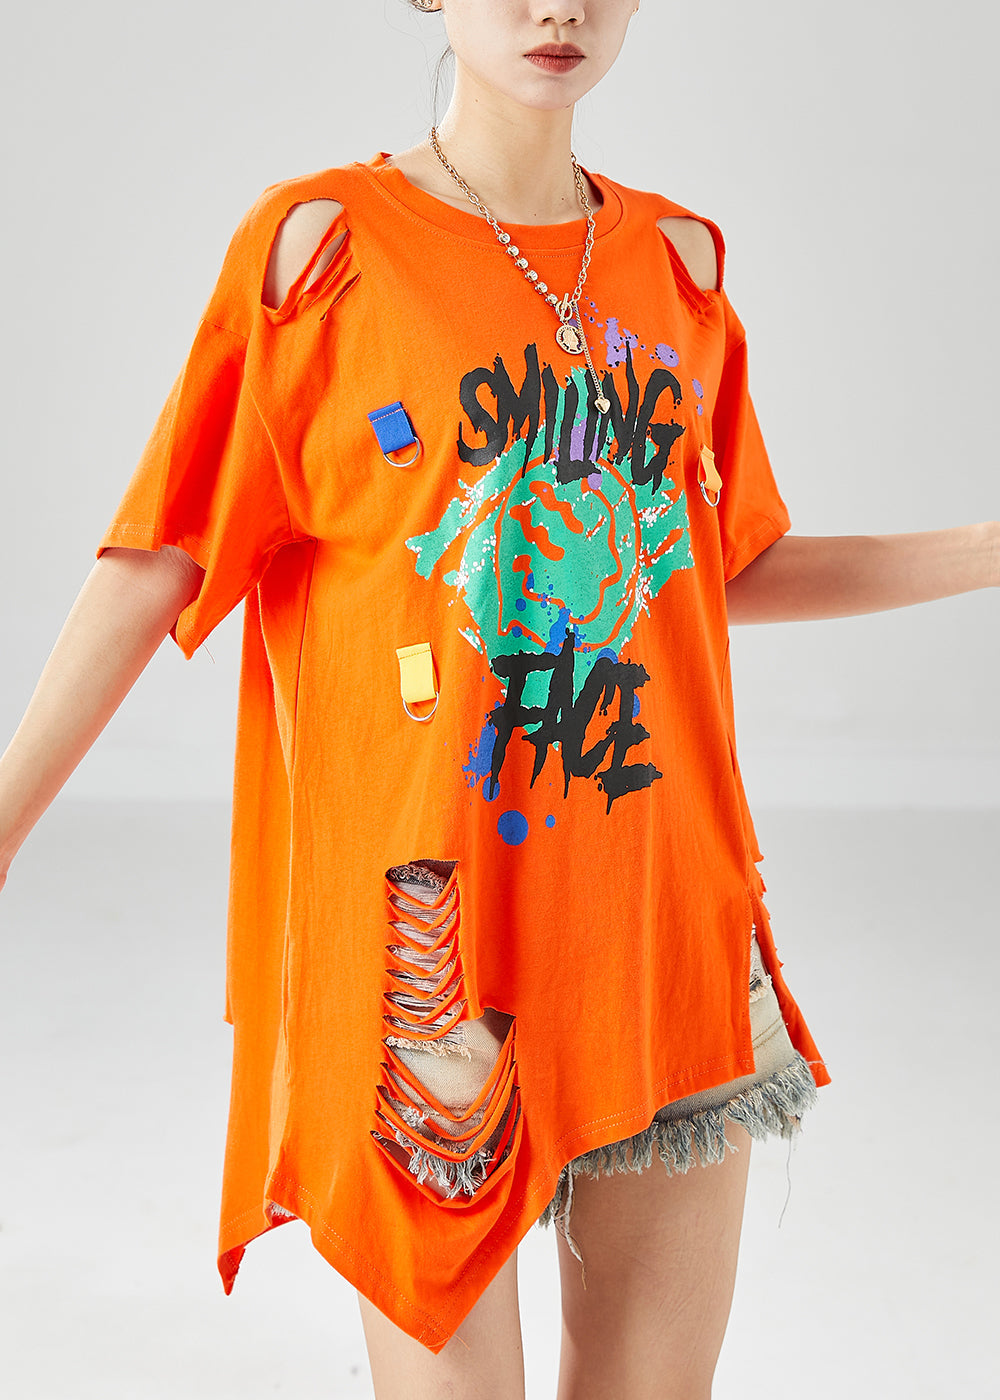 Orange Hollow Out Cotton Ripped Tank Oversized Print Summer LY6144 - fabuloryshop